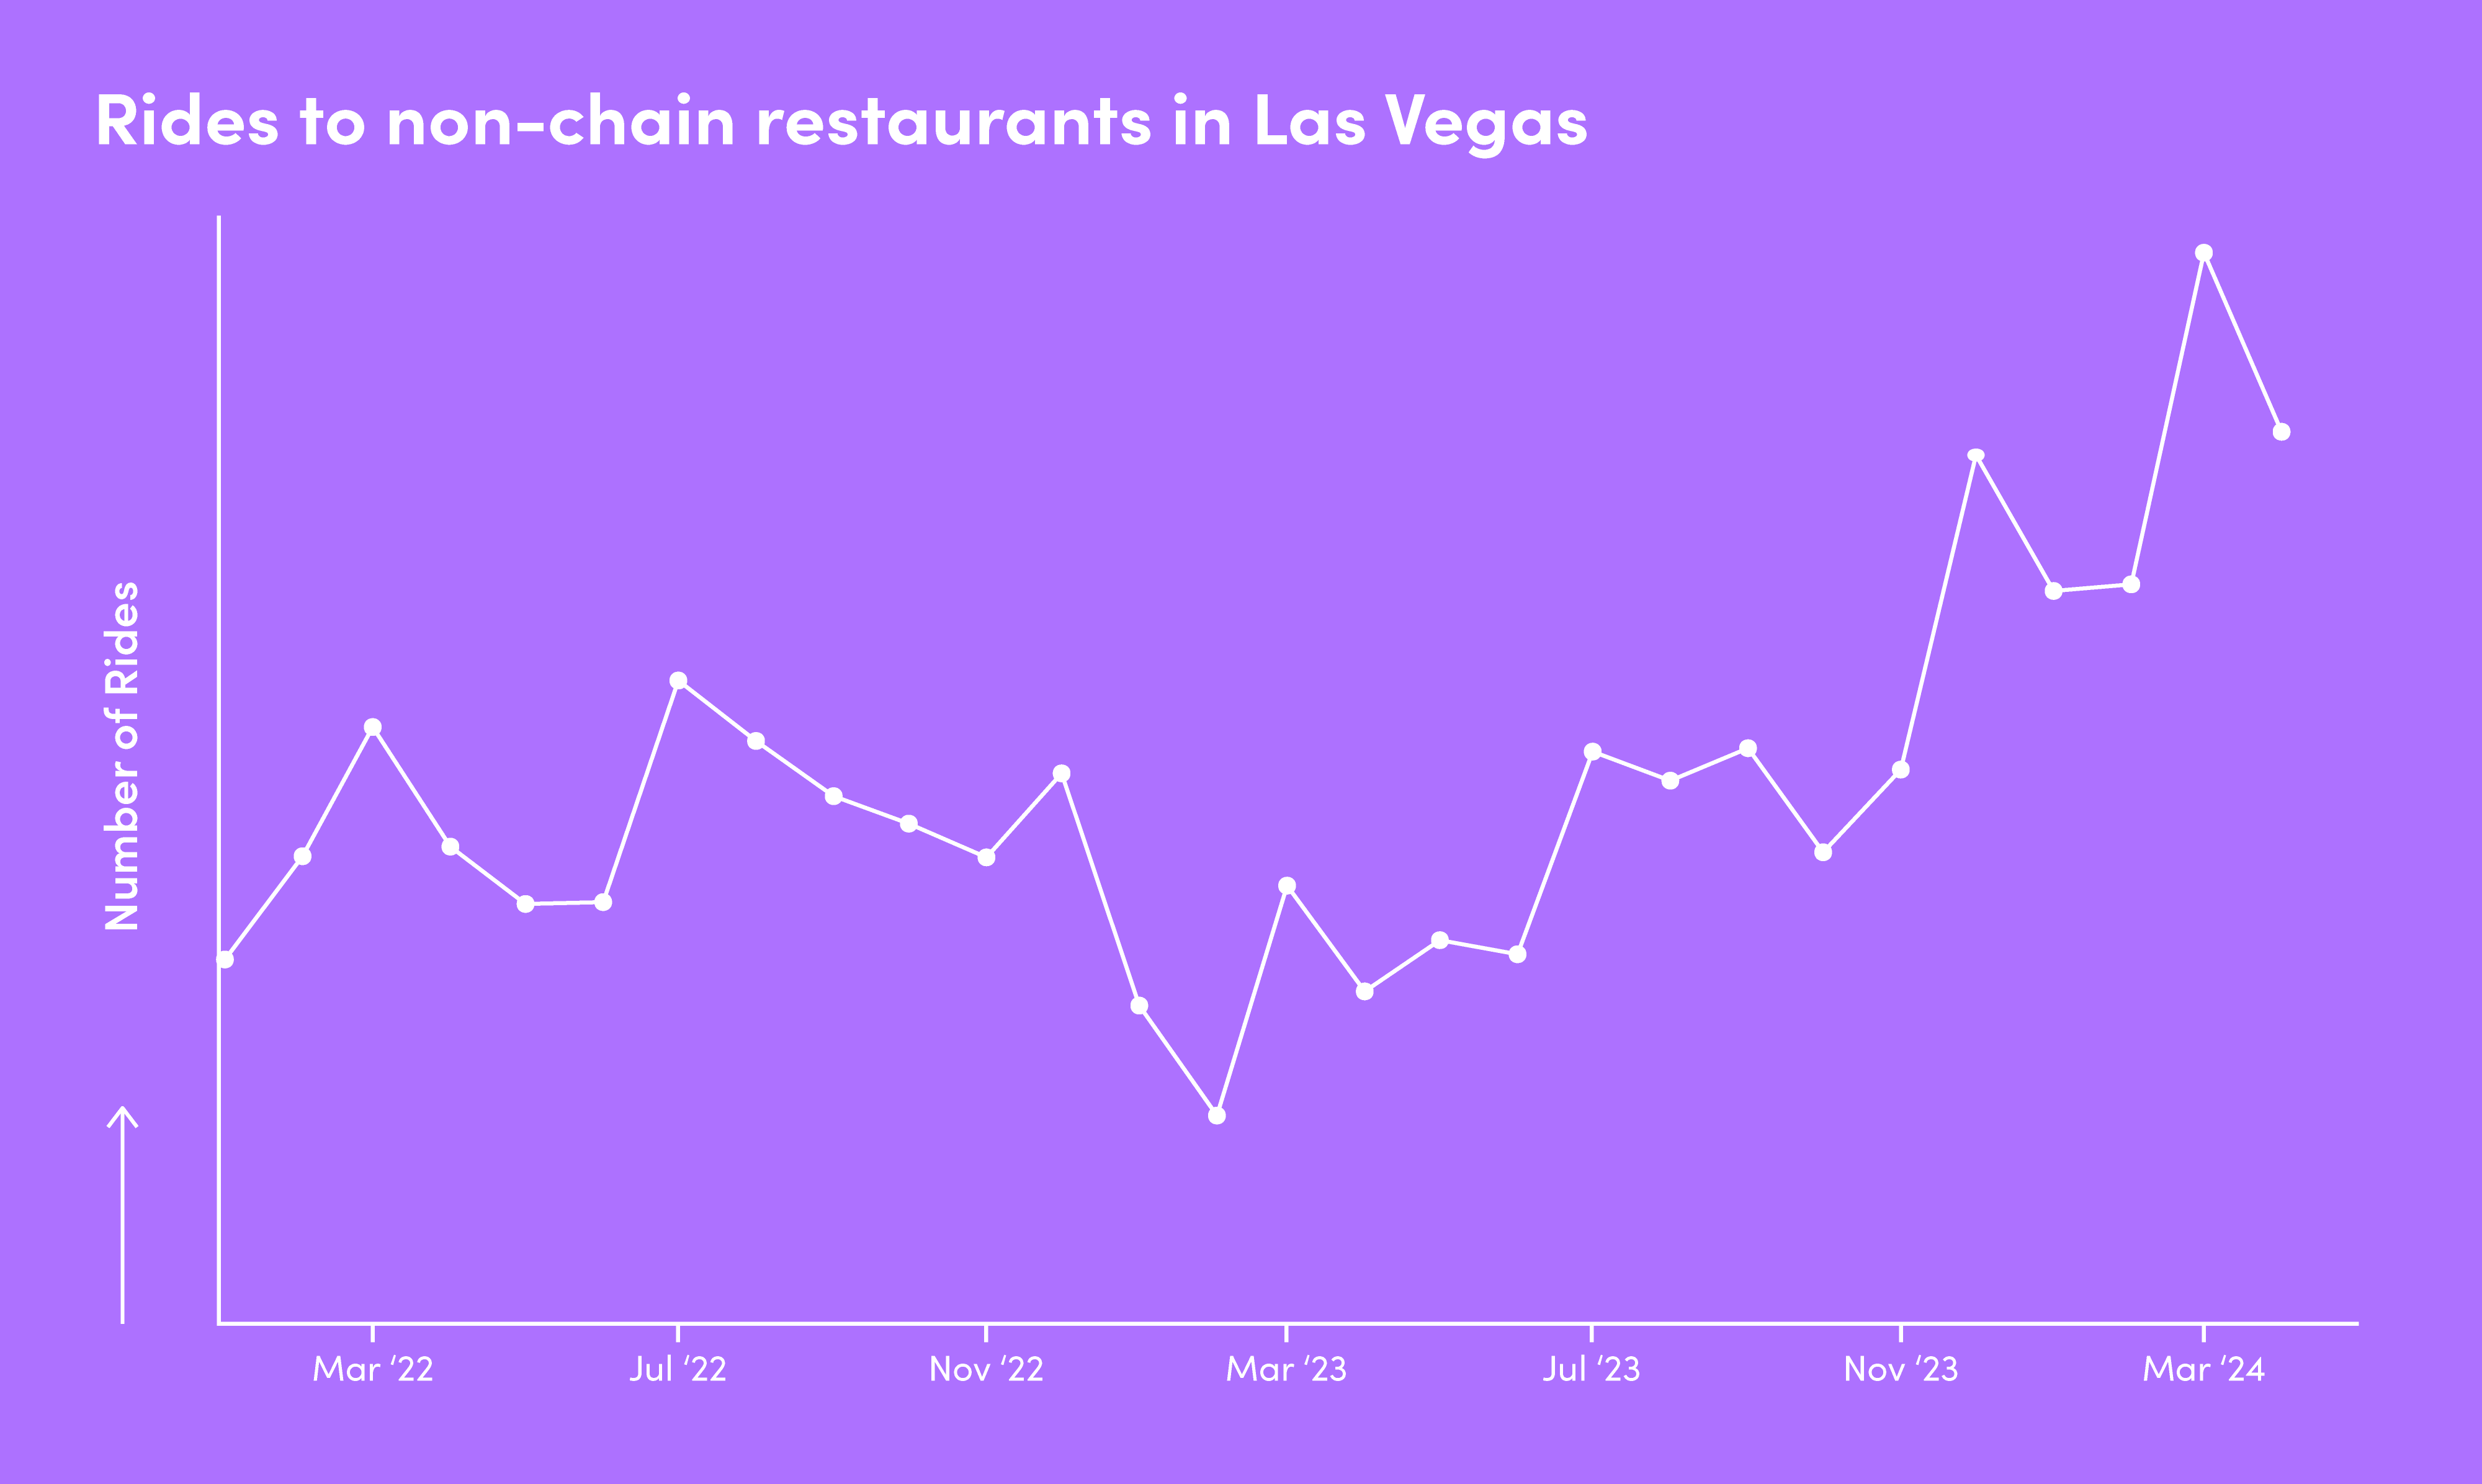 Chart showing rides to non-chain restaurants in Vegas